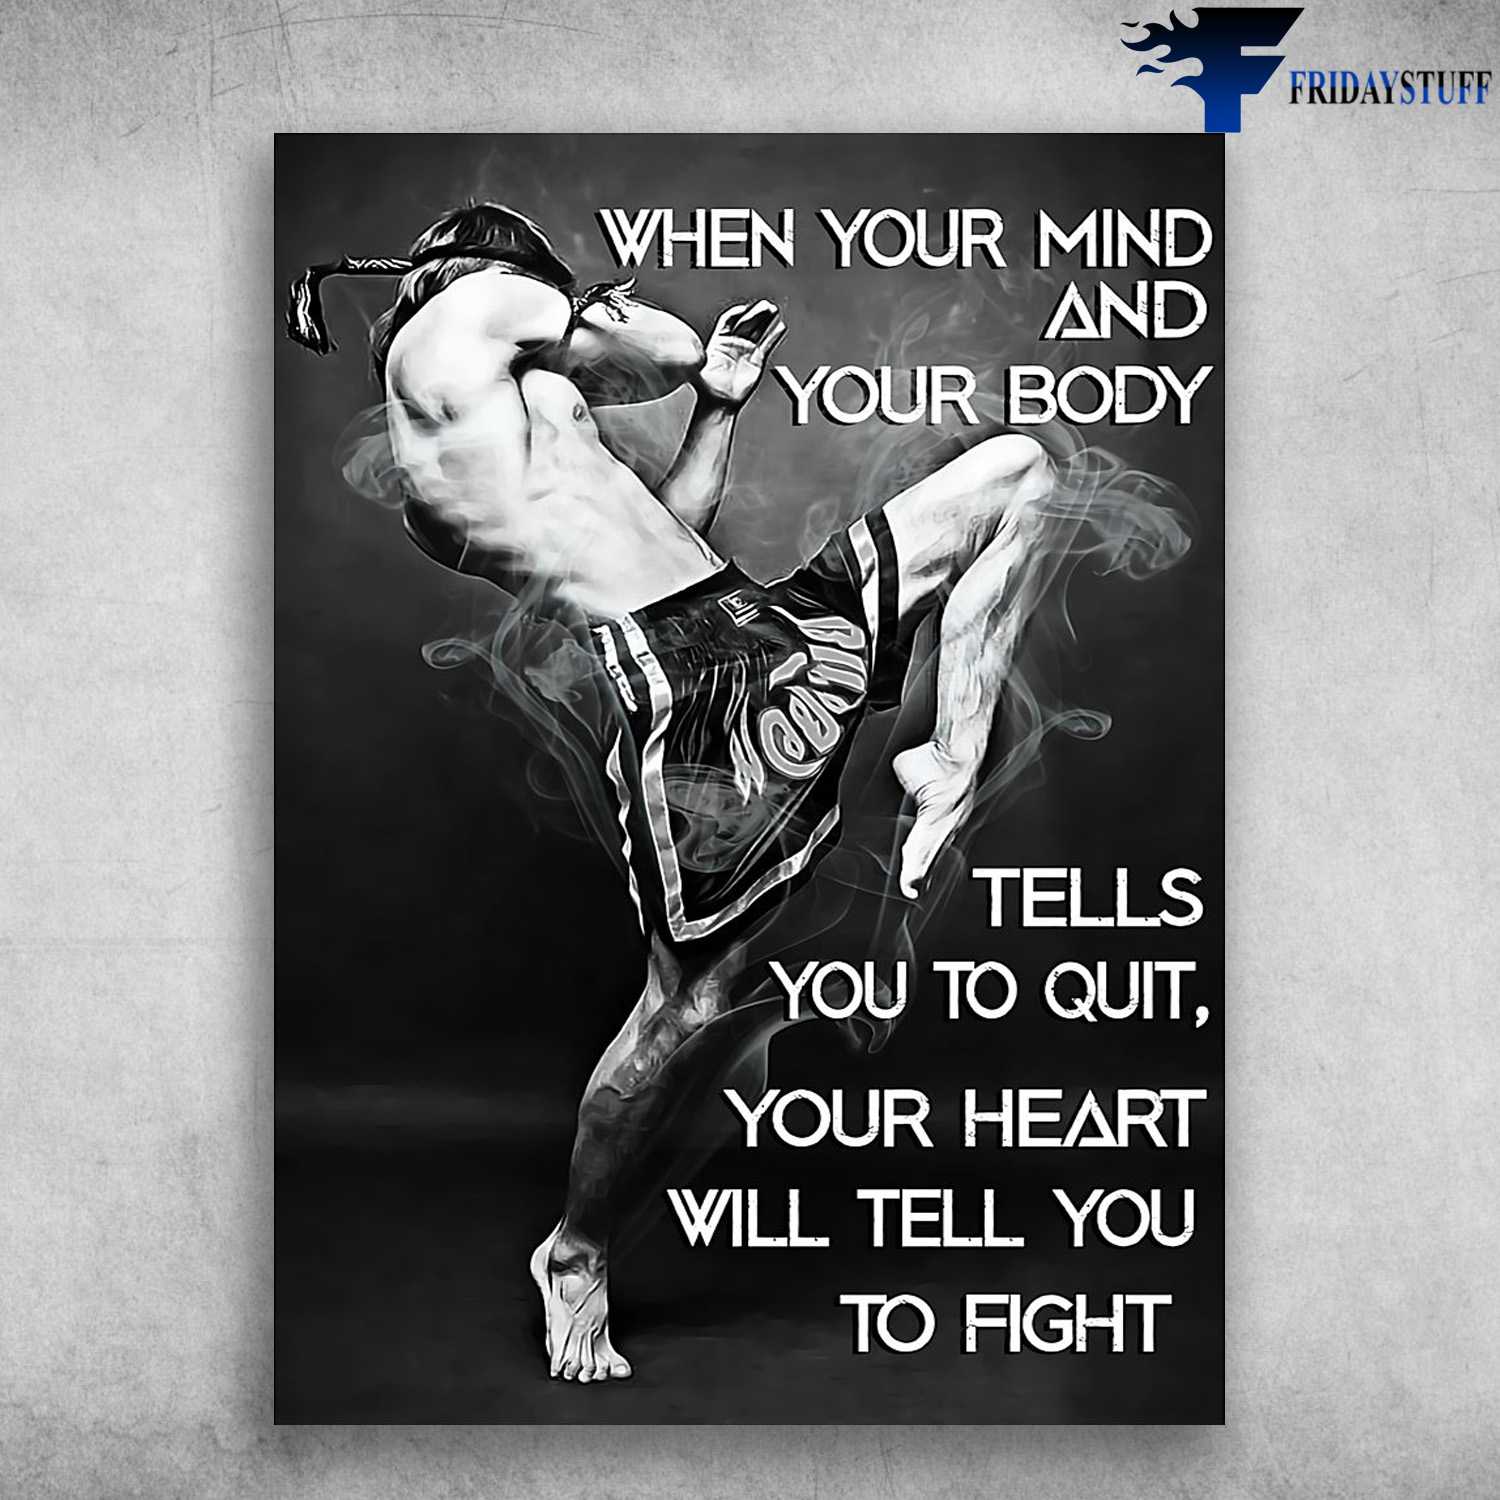 Muay Thai Poster - When Your Mind And Your Body, Tells You To Quit, Your Heart Will Tell You To Fight